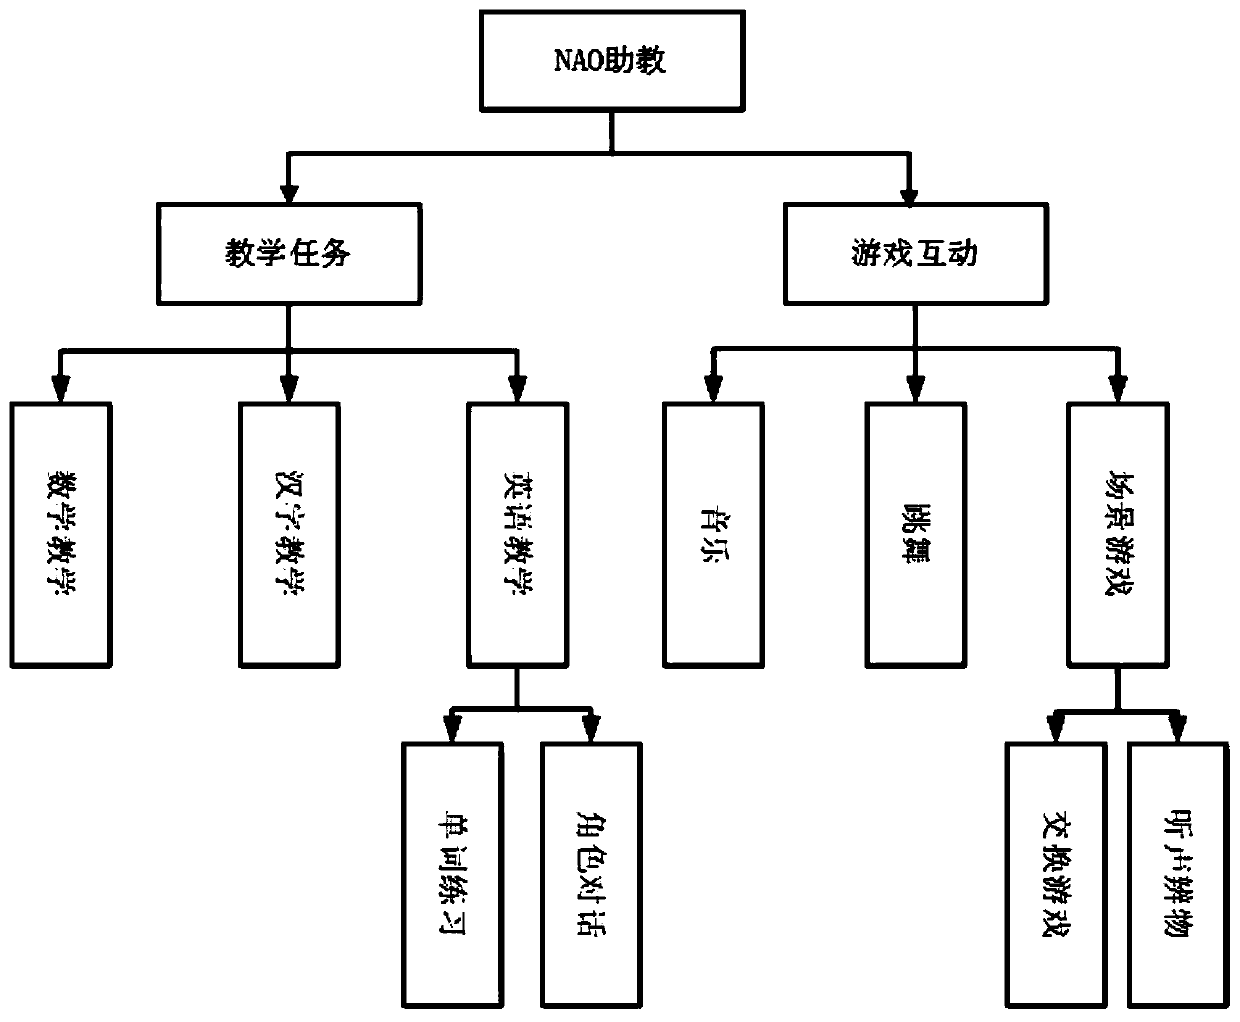 Auxiliary teaching system and method based on NAO robot